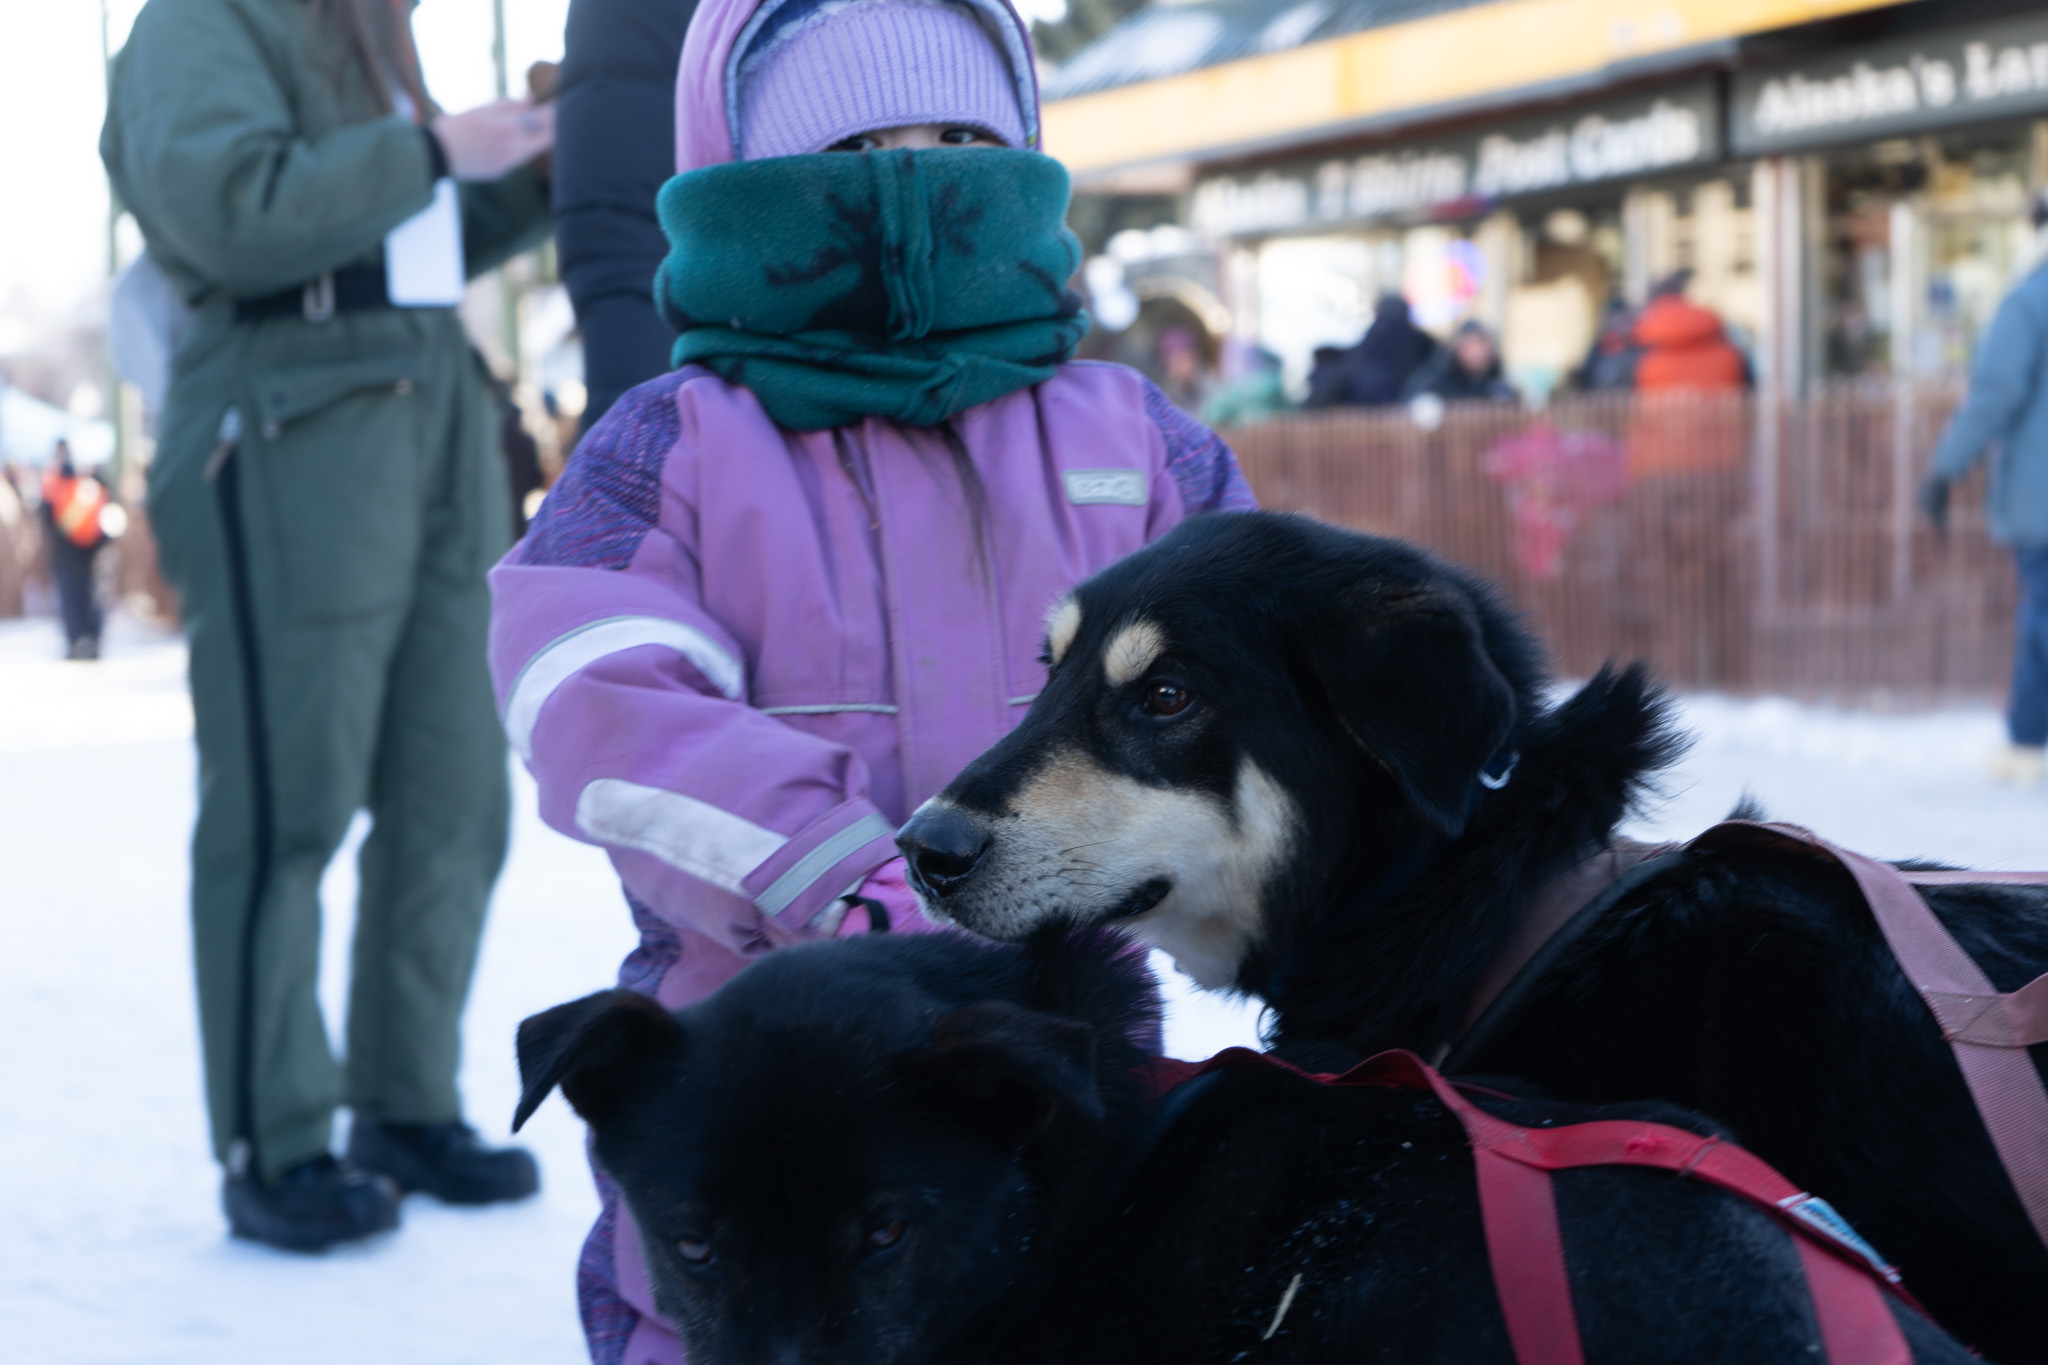 A girl in a purple snow suit holds some dogs in harnesses